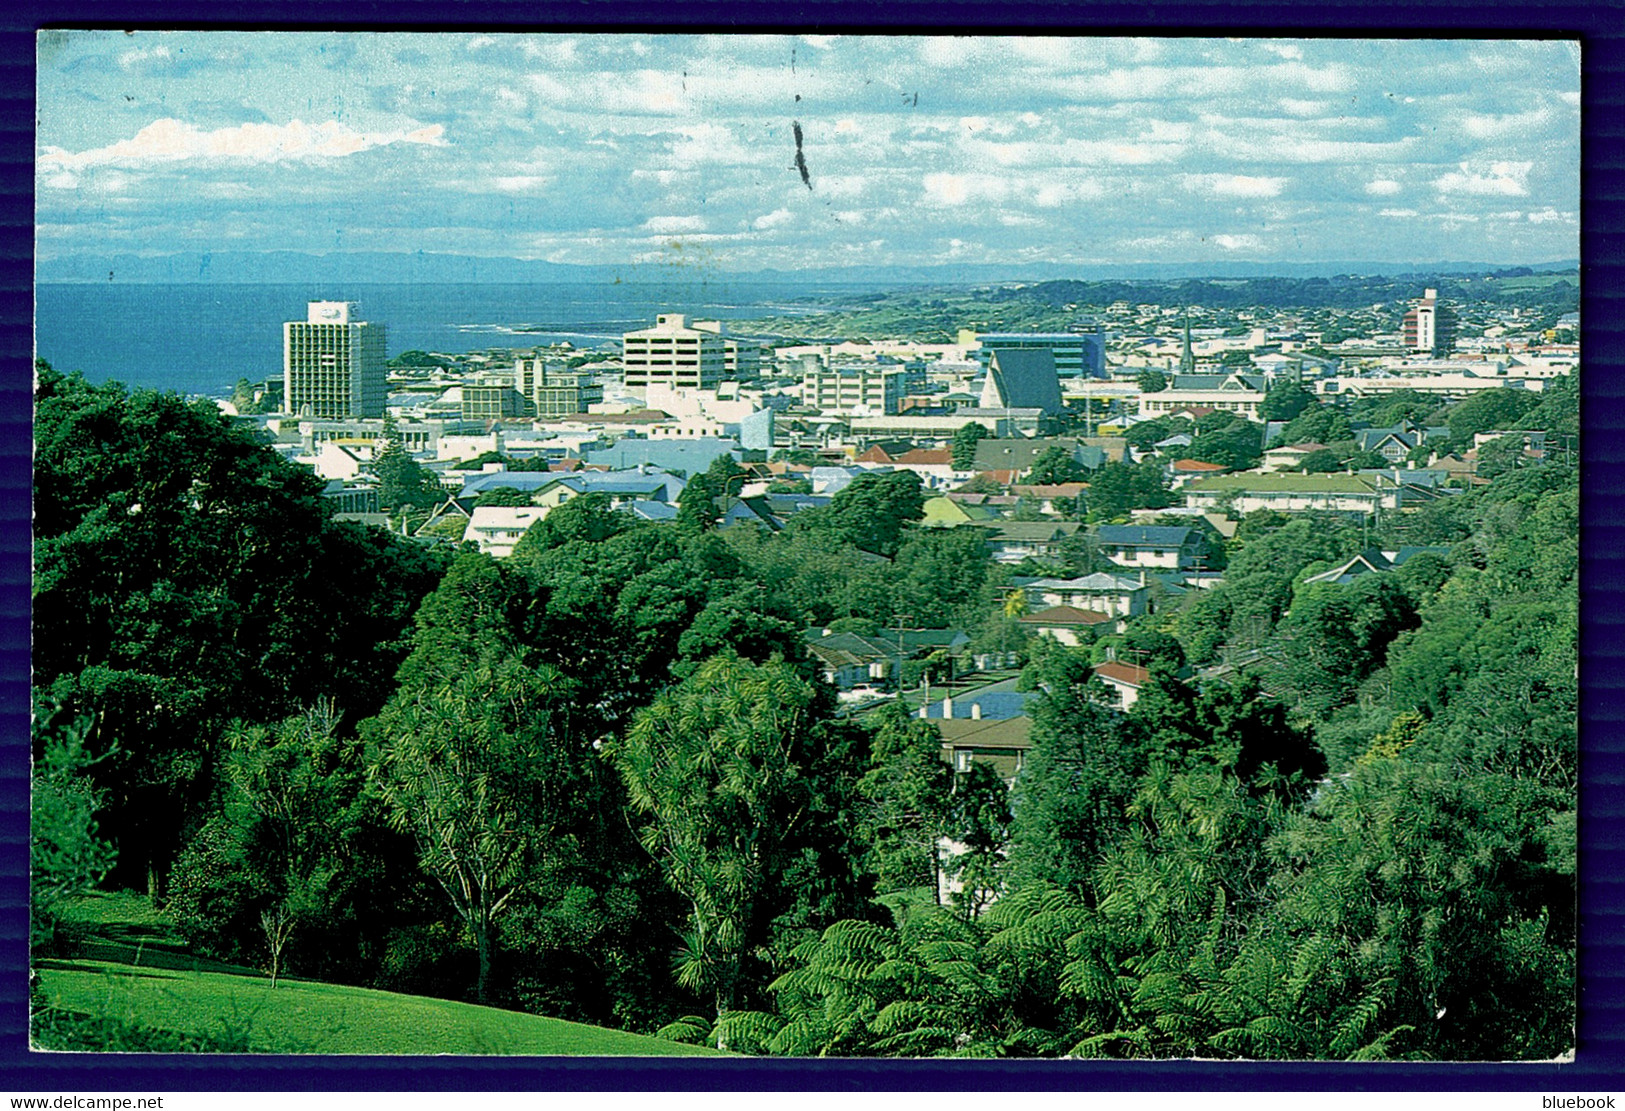 Ref  1582  -  2001 New Zealand Postcard - New Plymouth $1.50 Rate To Solihull - Brieven En Documenten